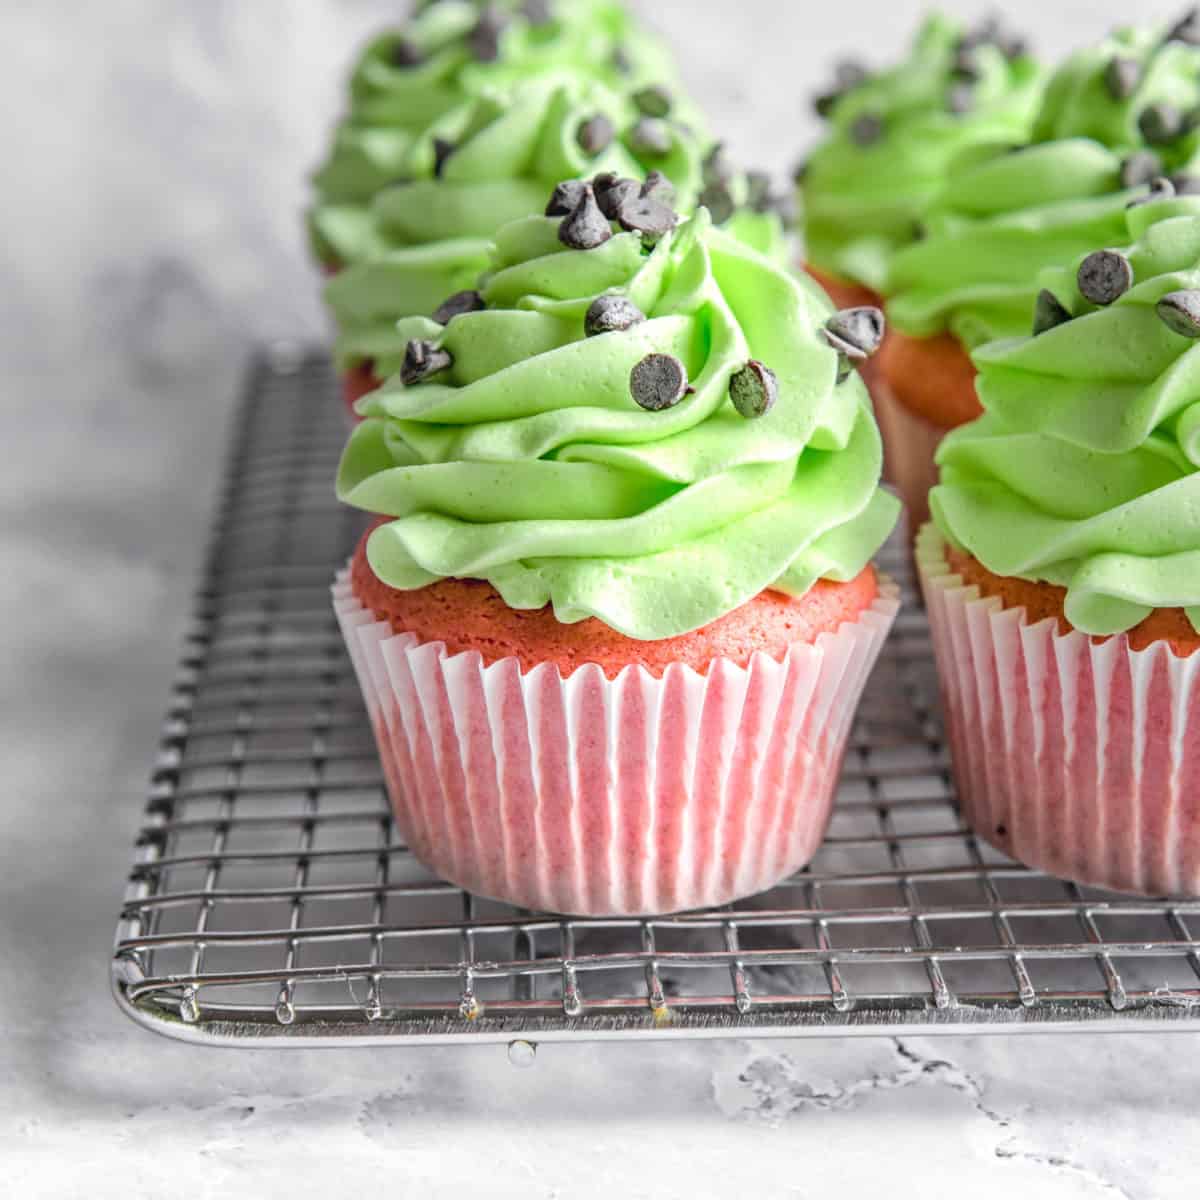 Cupcake with green frosting topped with mini chocolate chips.